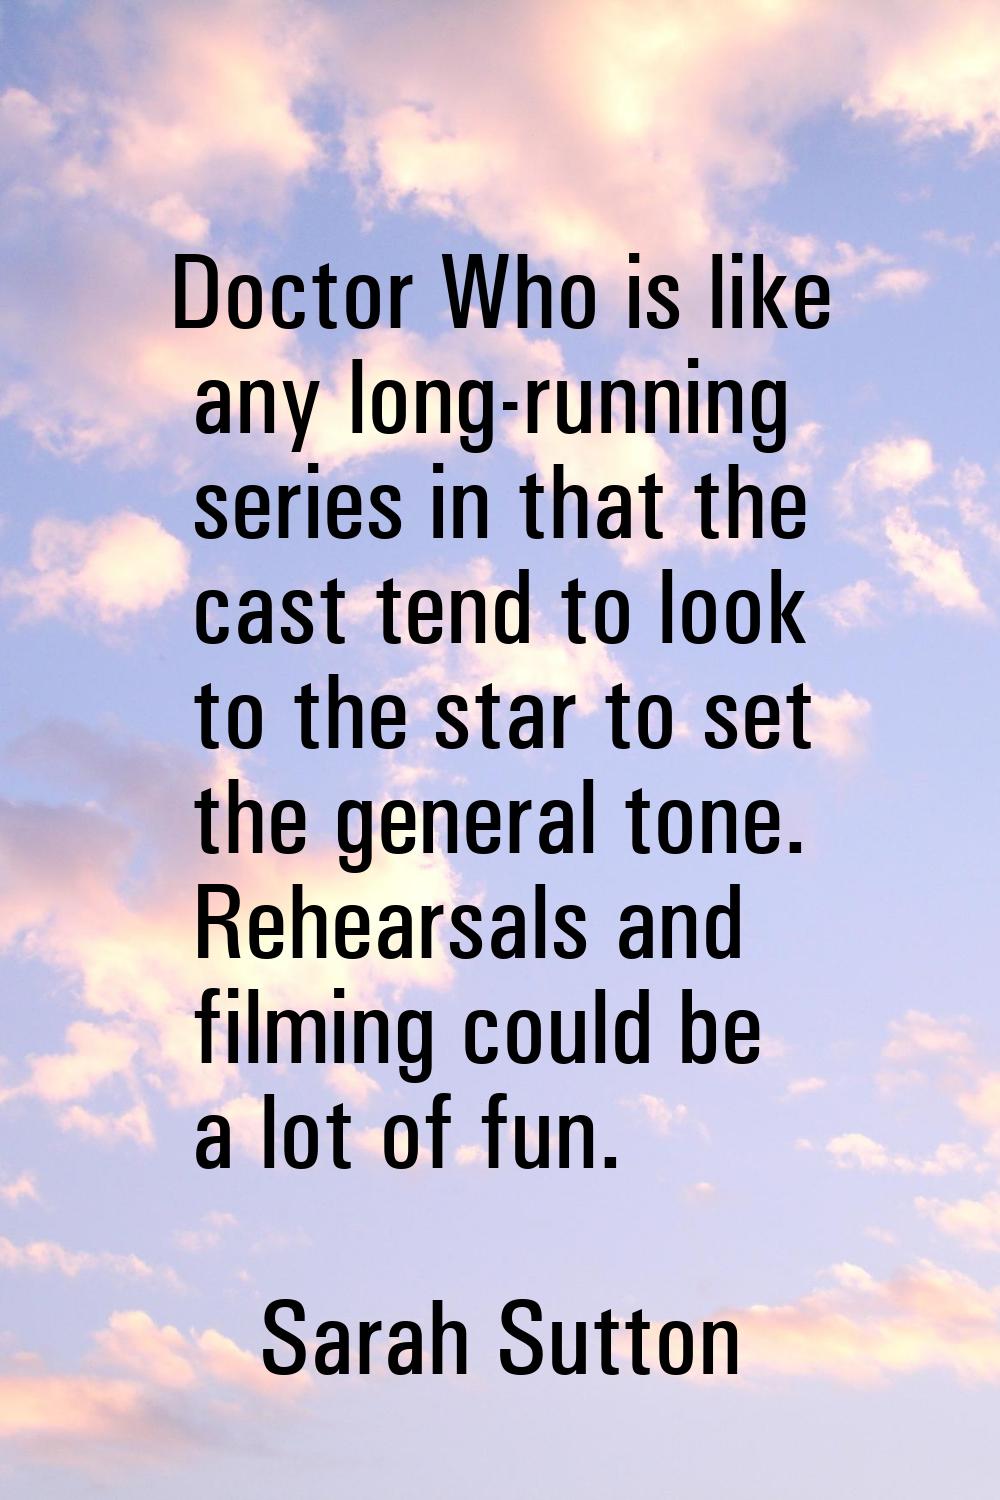 Doctor Who is like any long-running series in that the cast tend to look to the star to set the gen